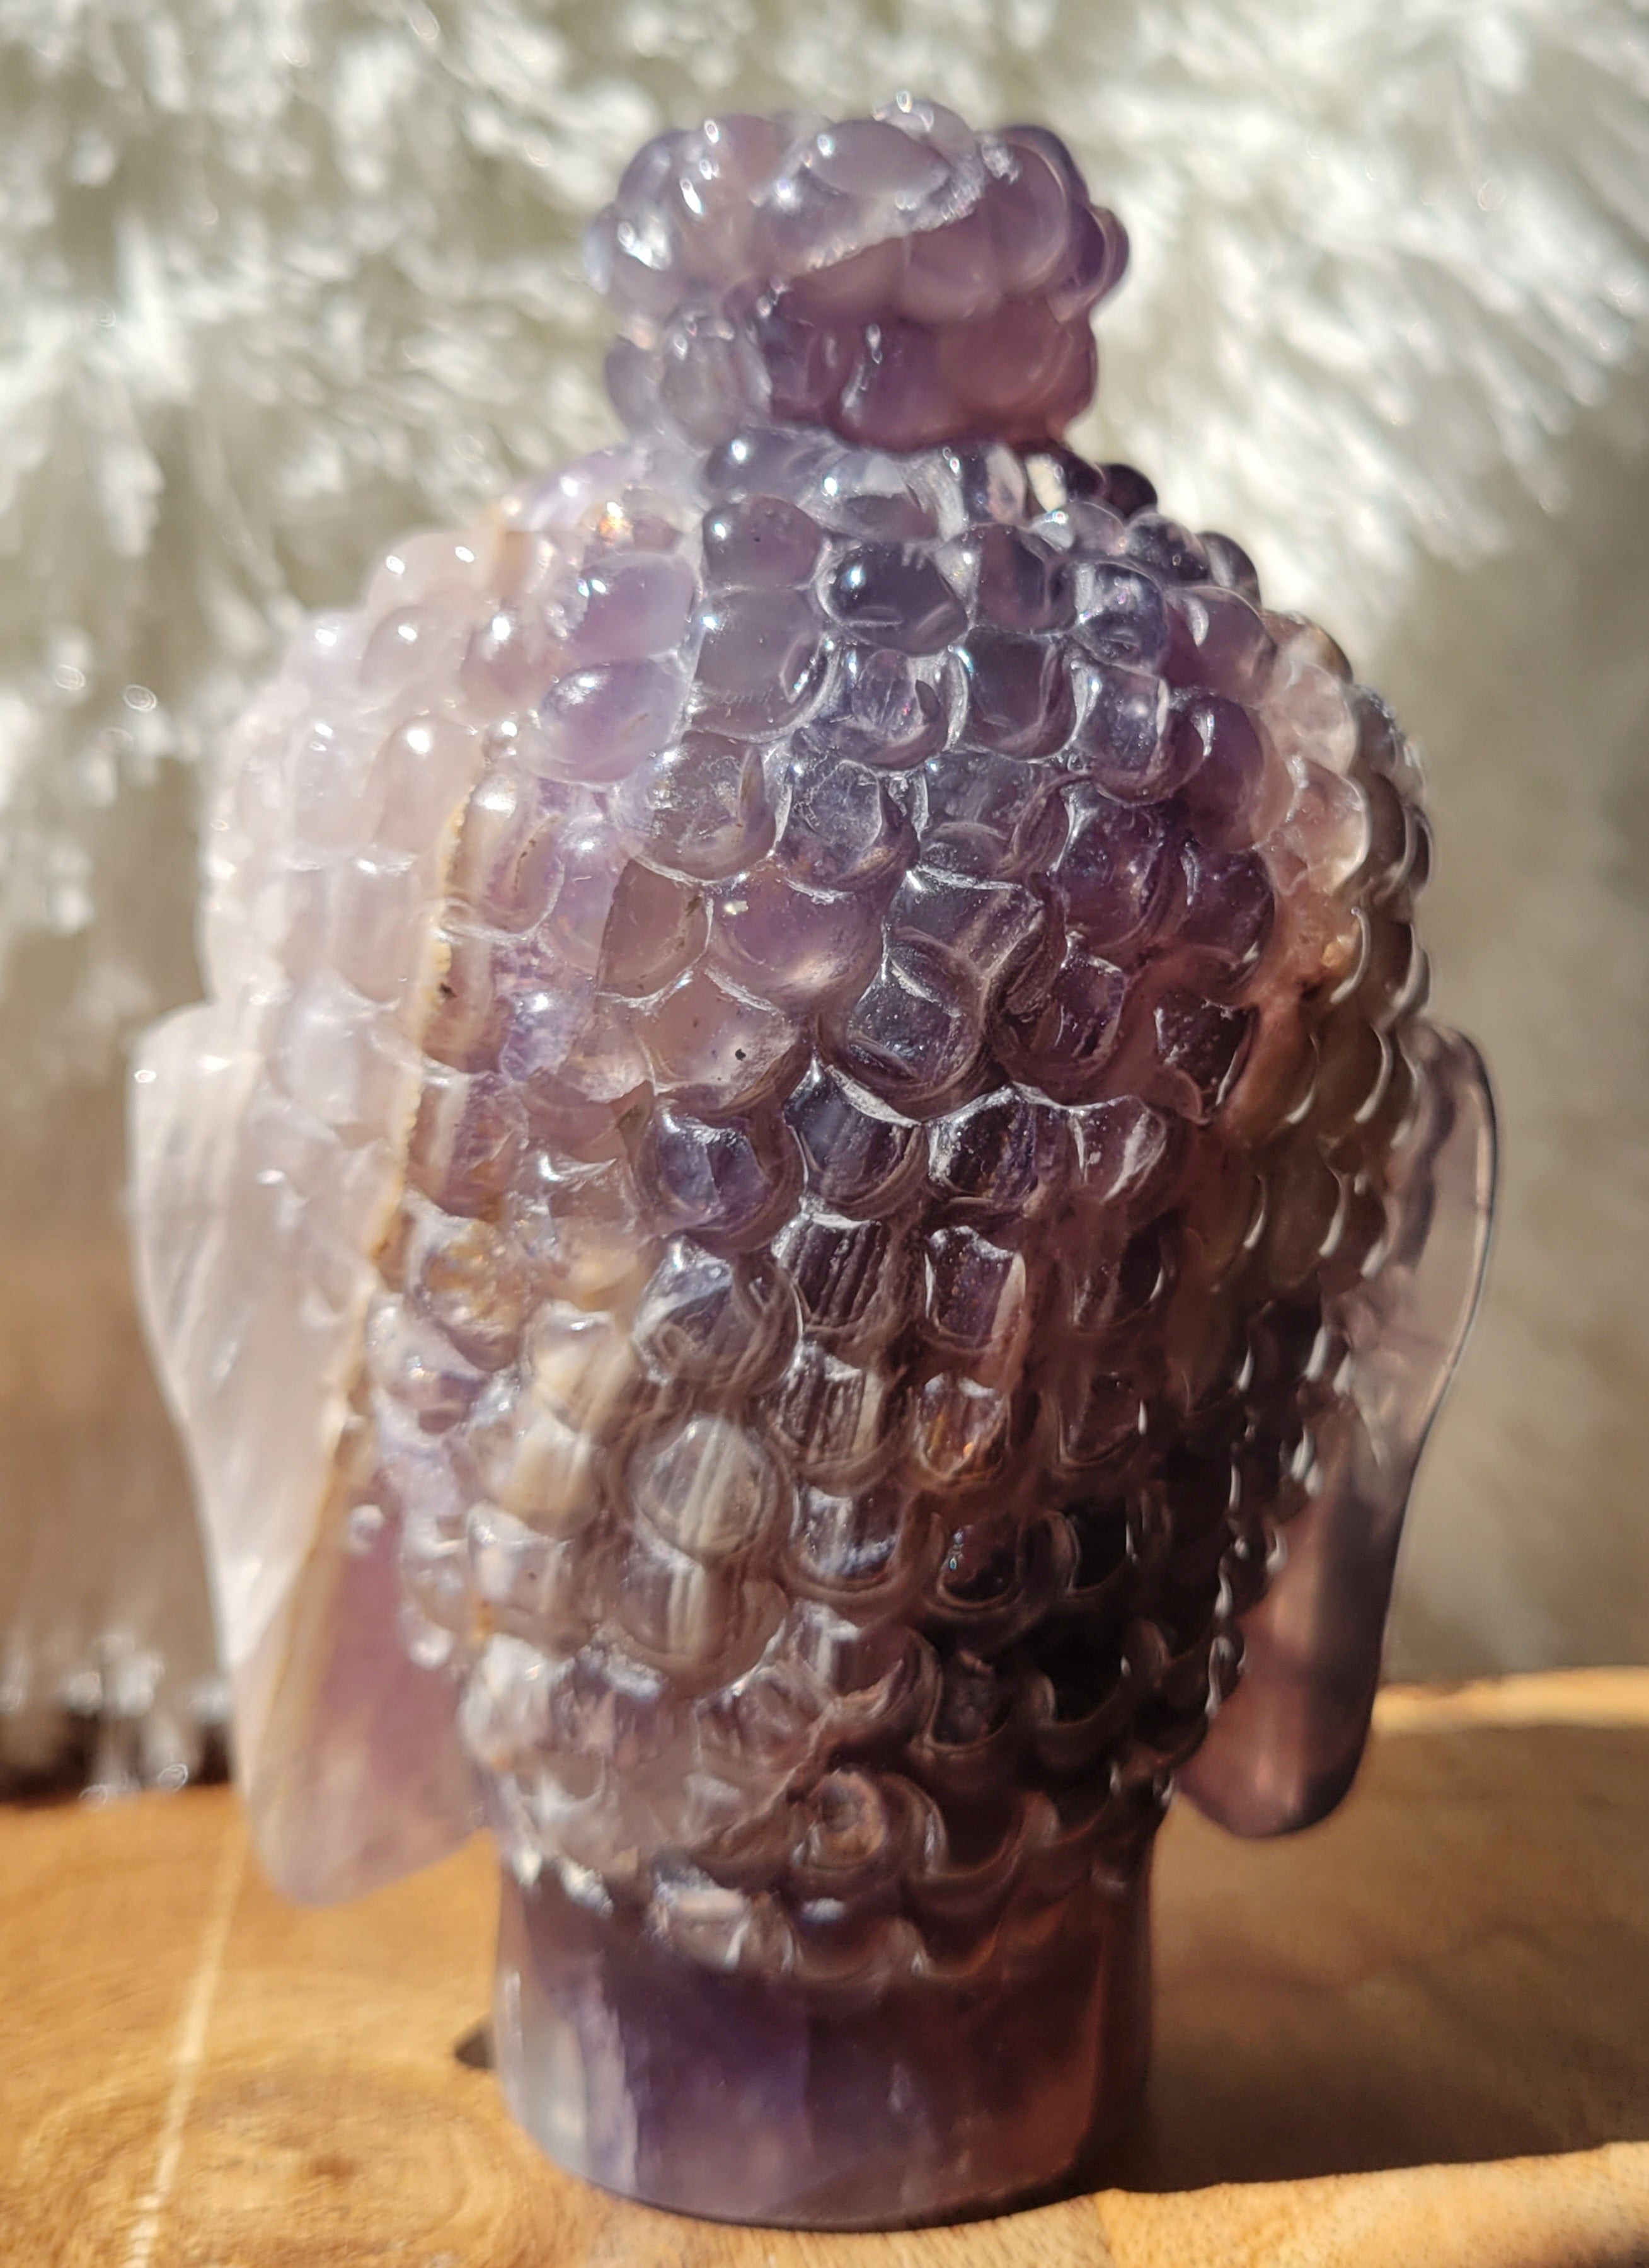 Baby Buddha Carving (Fluorite) – Flipped Crystal